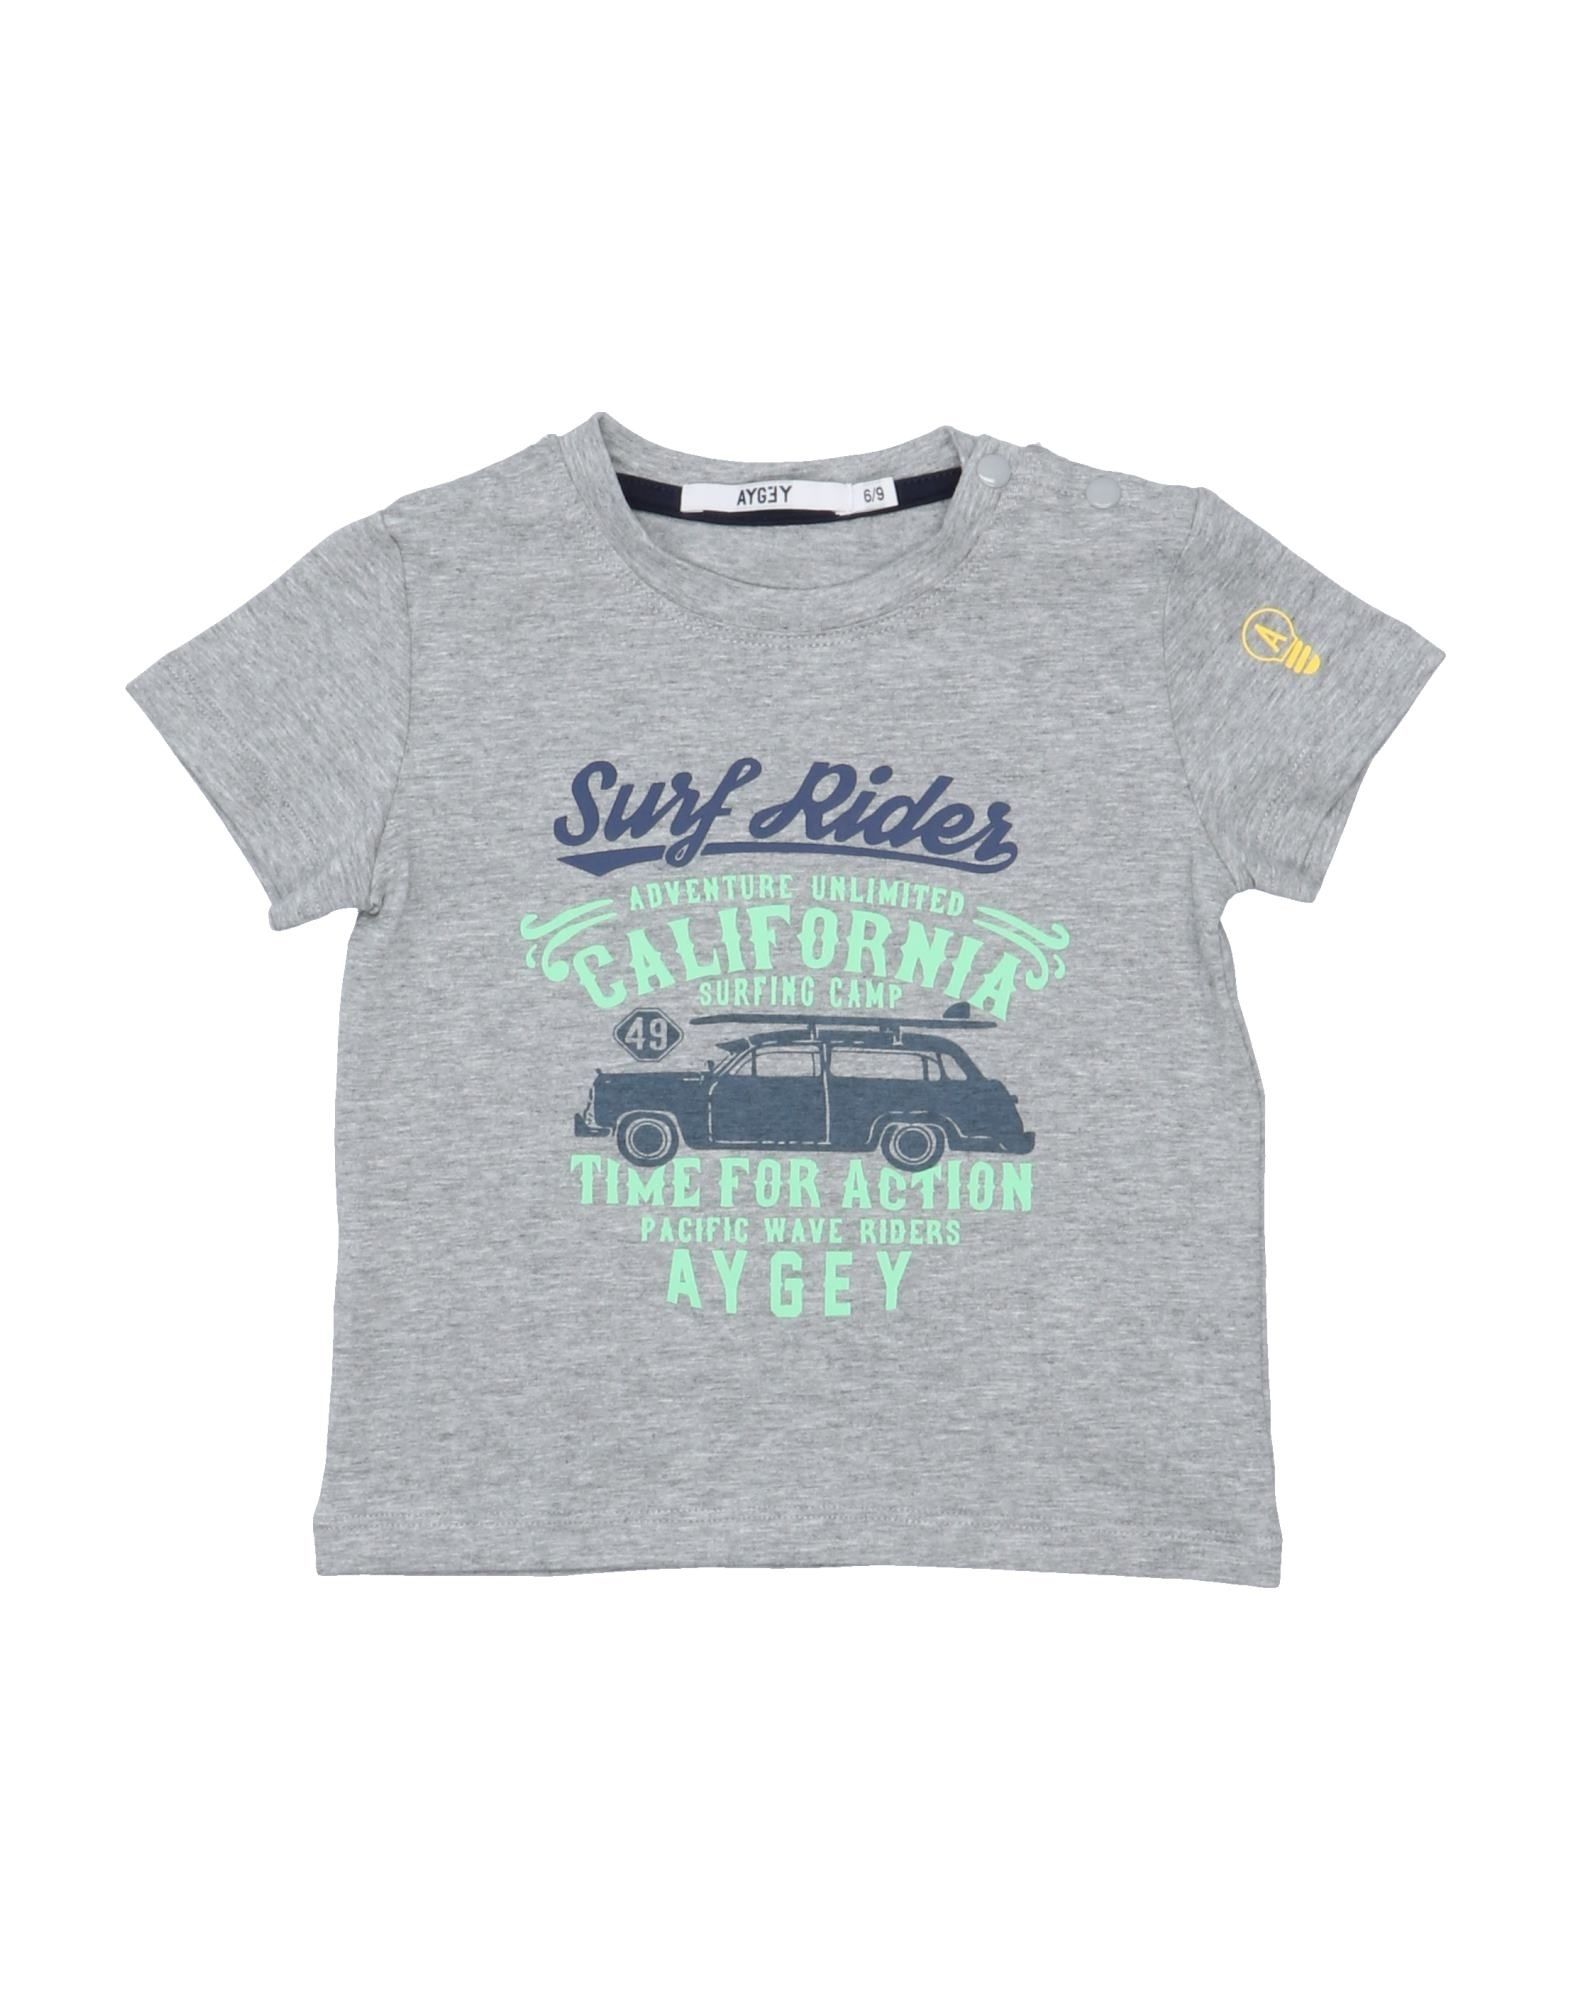 Aygey Kids' T-shirts In Grey